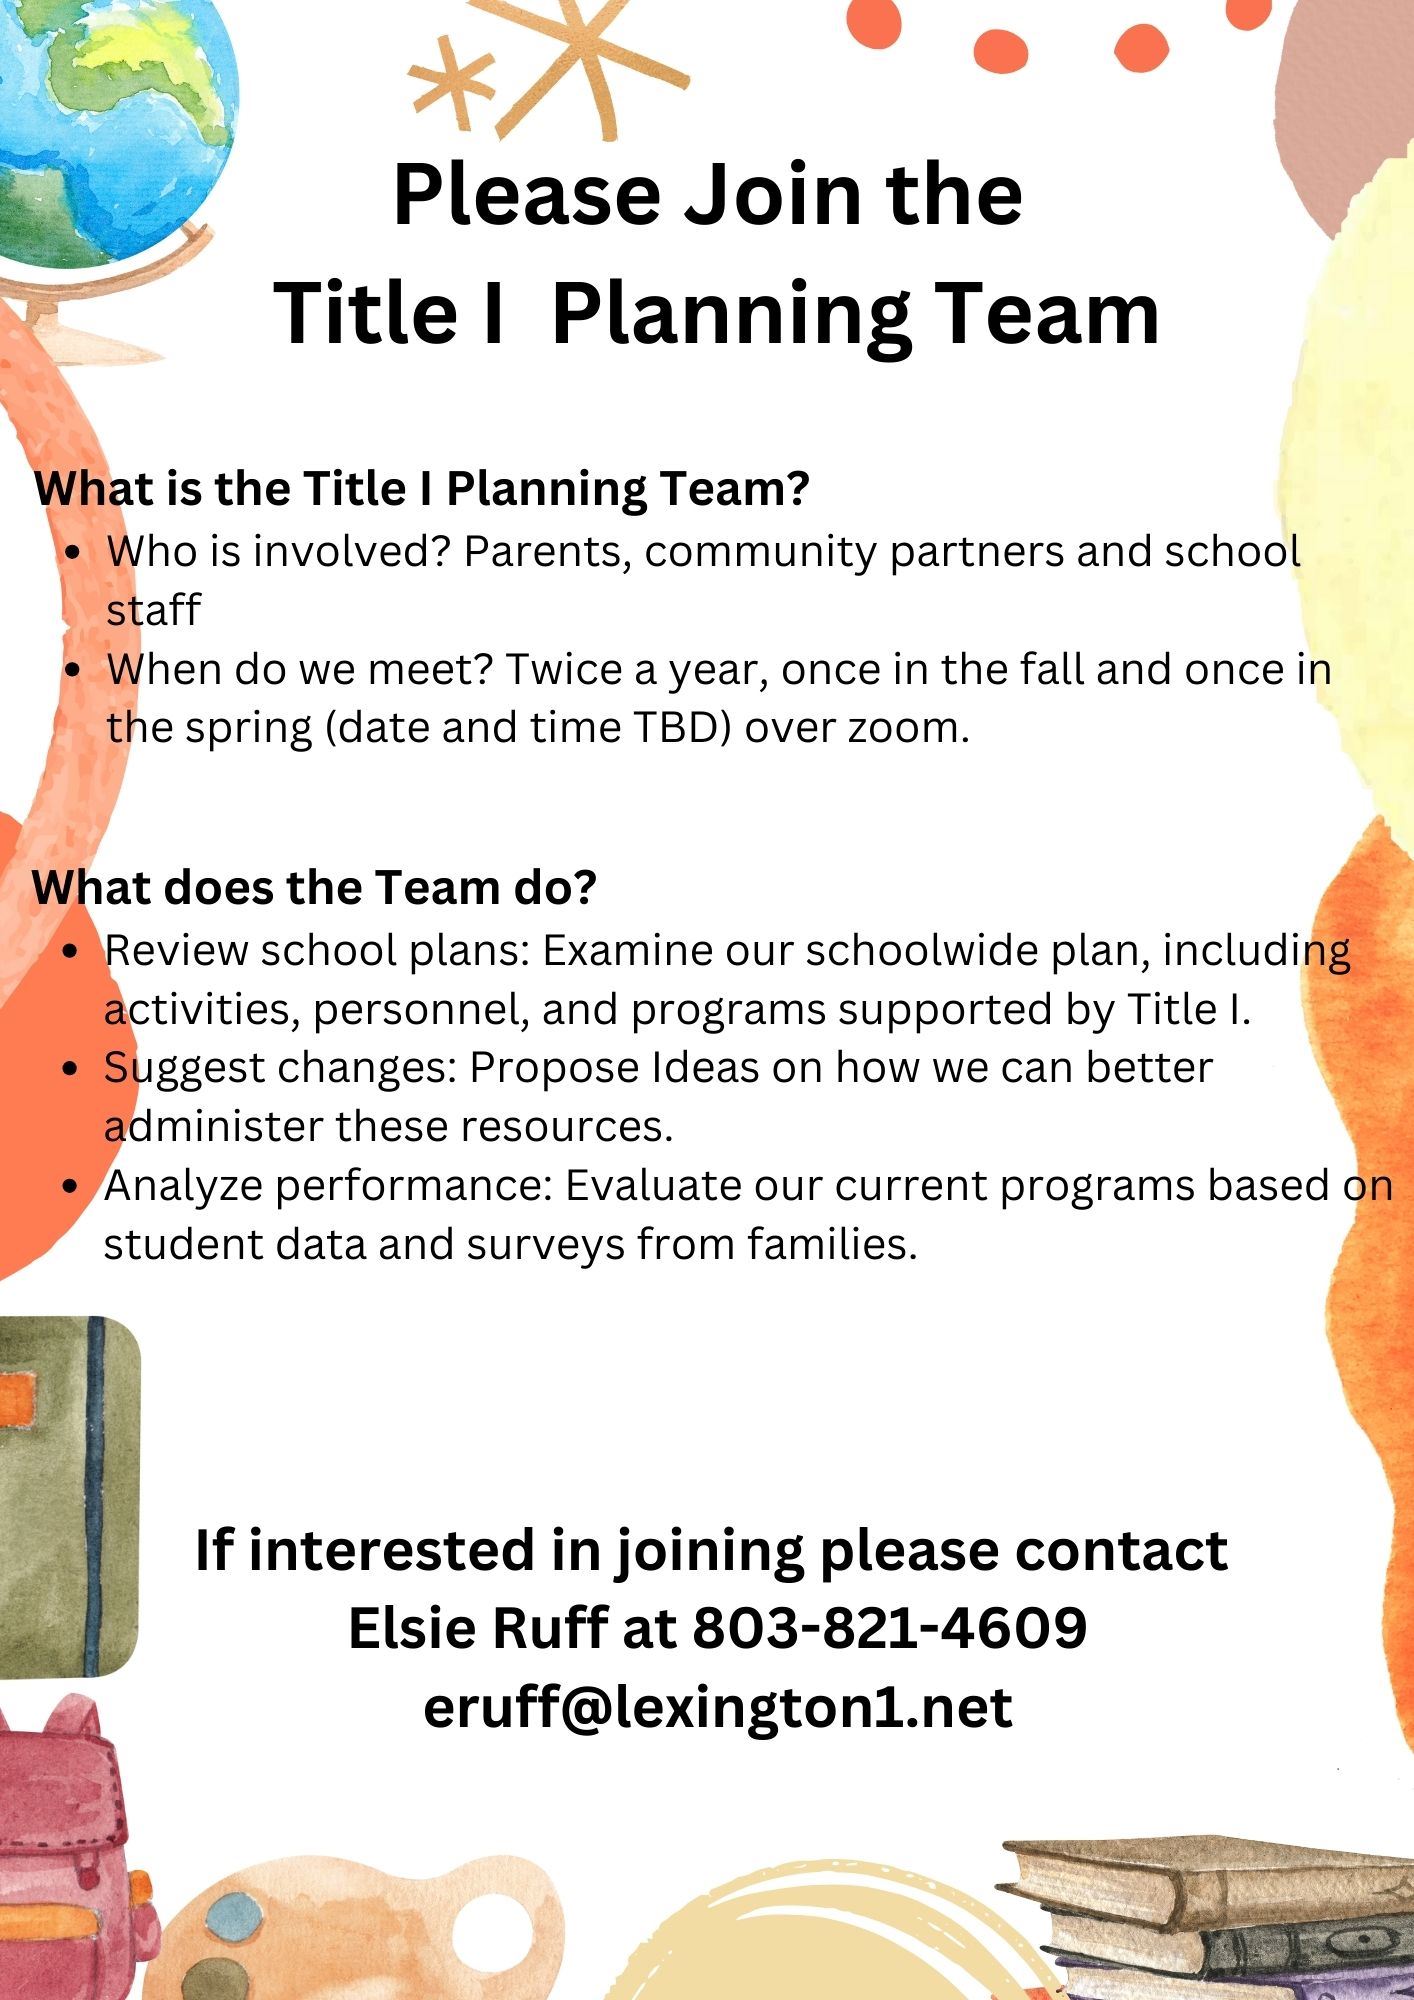 Please Join the Title 1 Planning Team